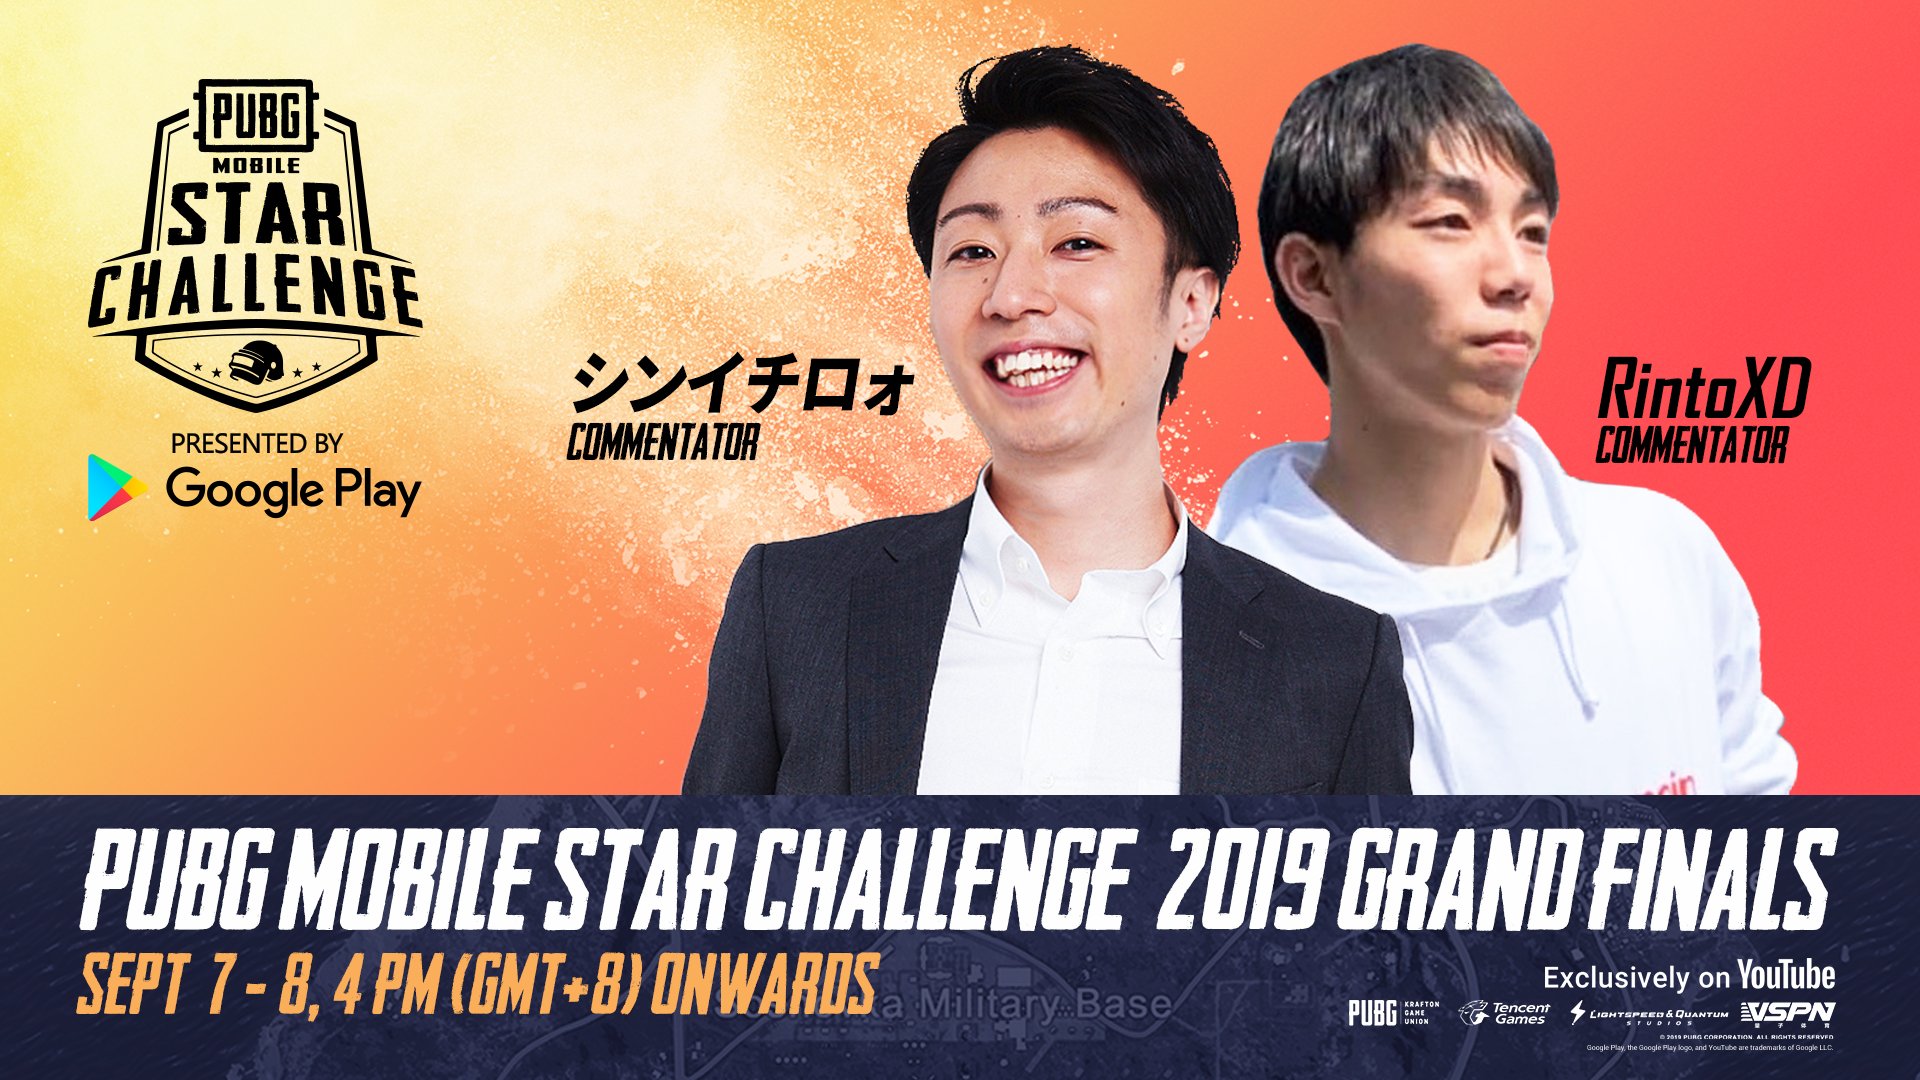 PUBG MOBILE – RintoXDが解説として9月7日、8日に開催の『PUBG MOBILE STAR CHALLENGE 2019 GRAND FINALS』に出演｜See below for the English News